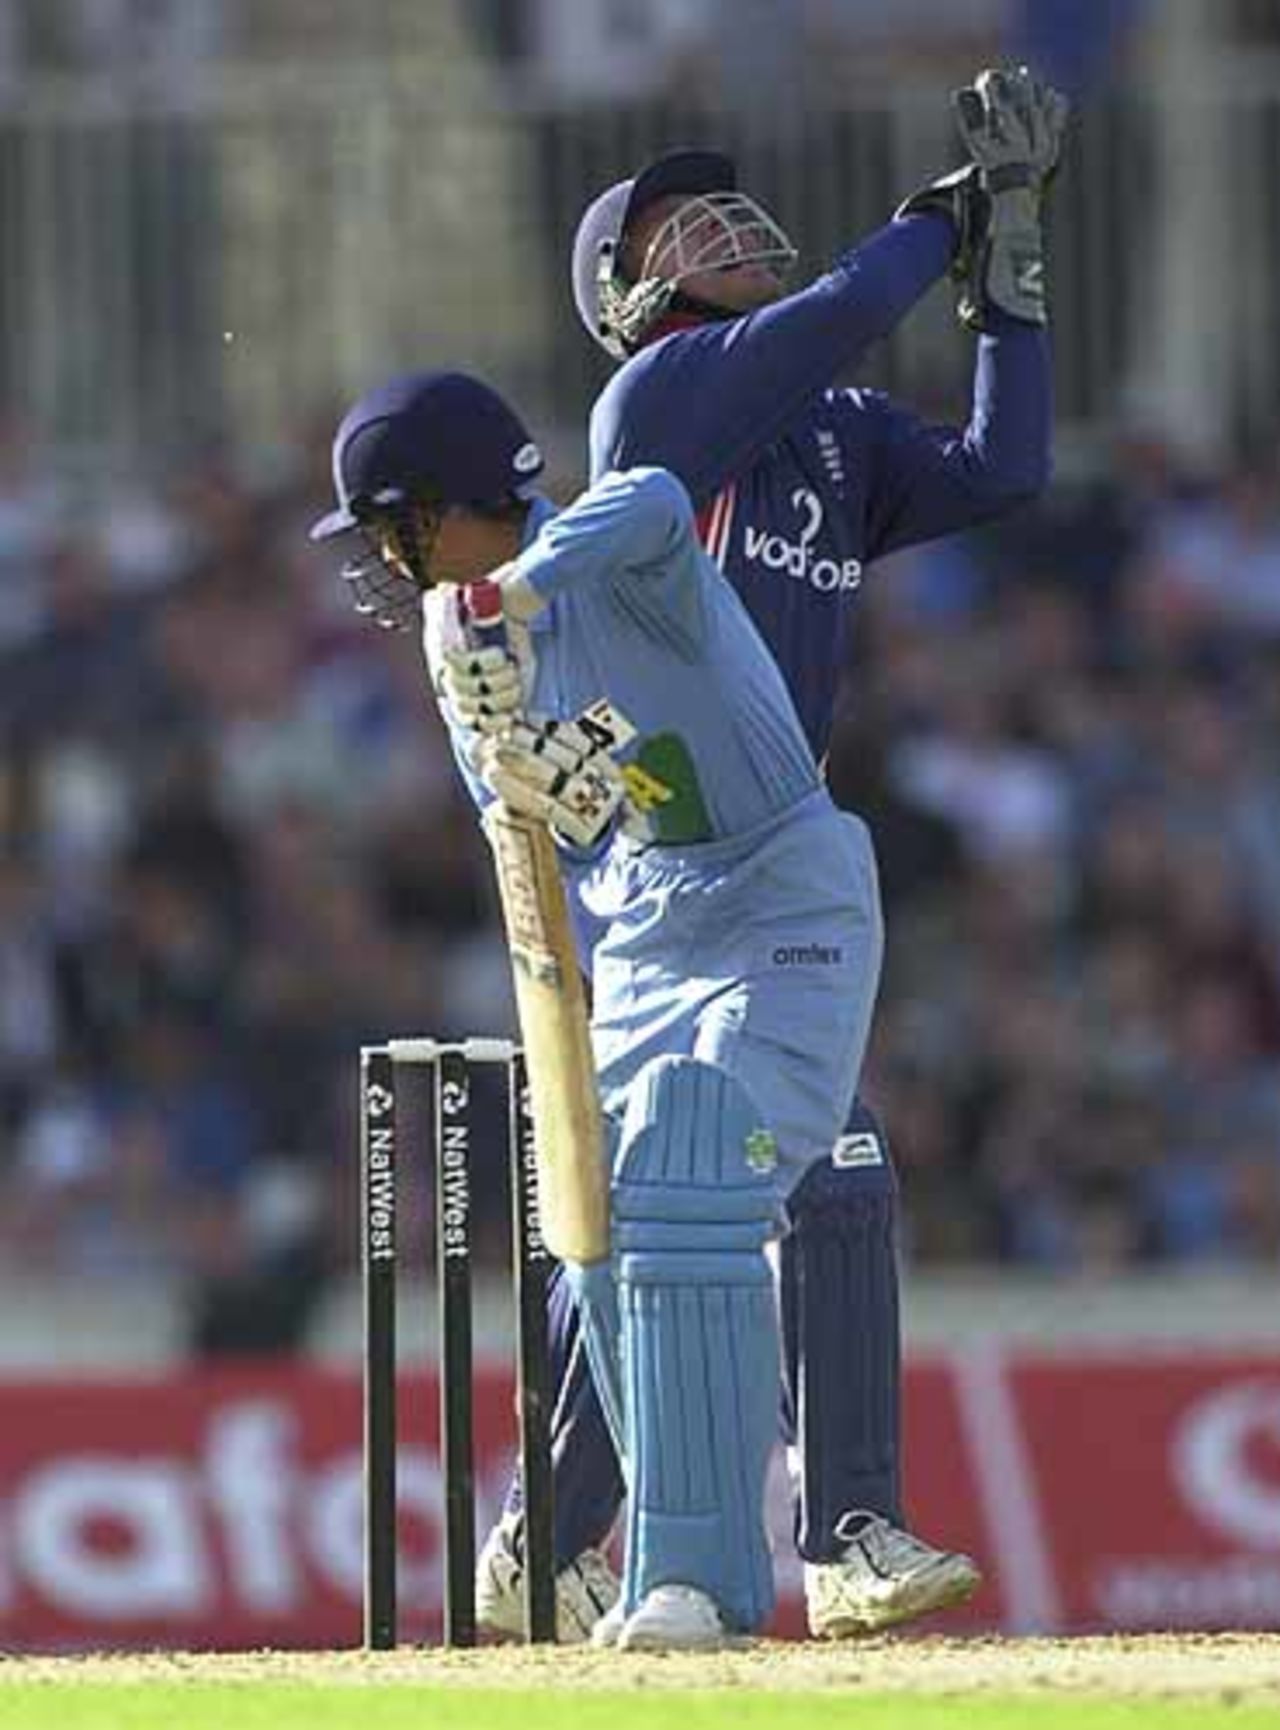 Stewart catches Ratra off the bowling of Irani for 2, England v India, NatWest Series, The Oval, Tue 9 Jul 2002